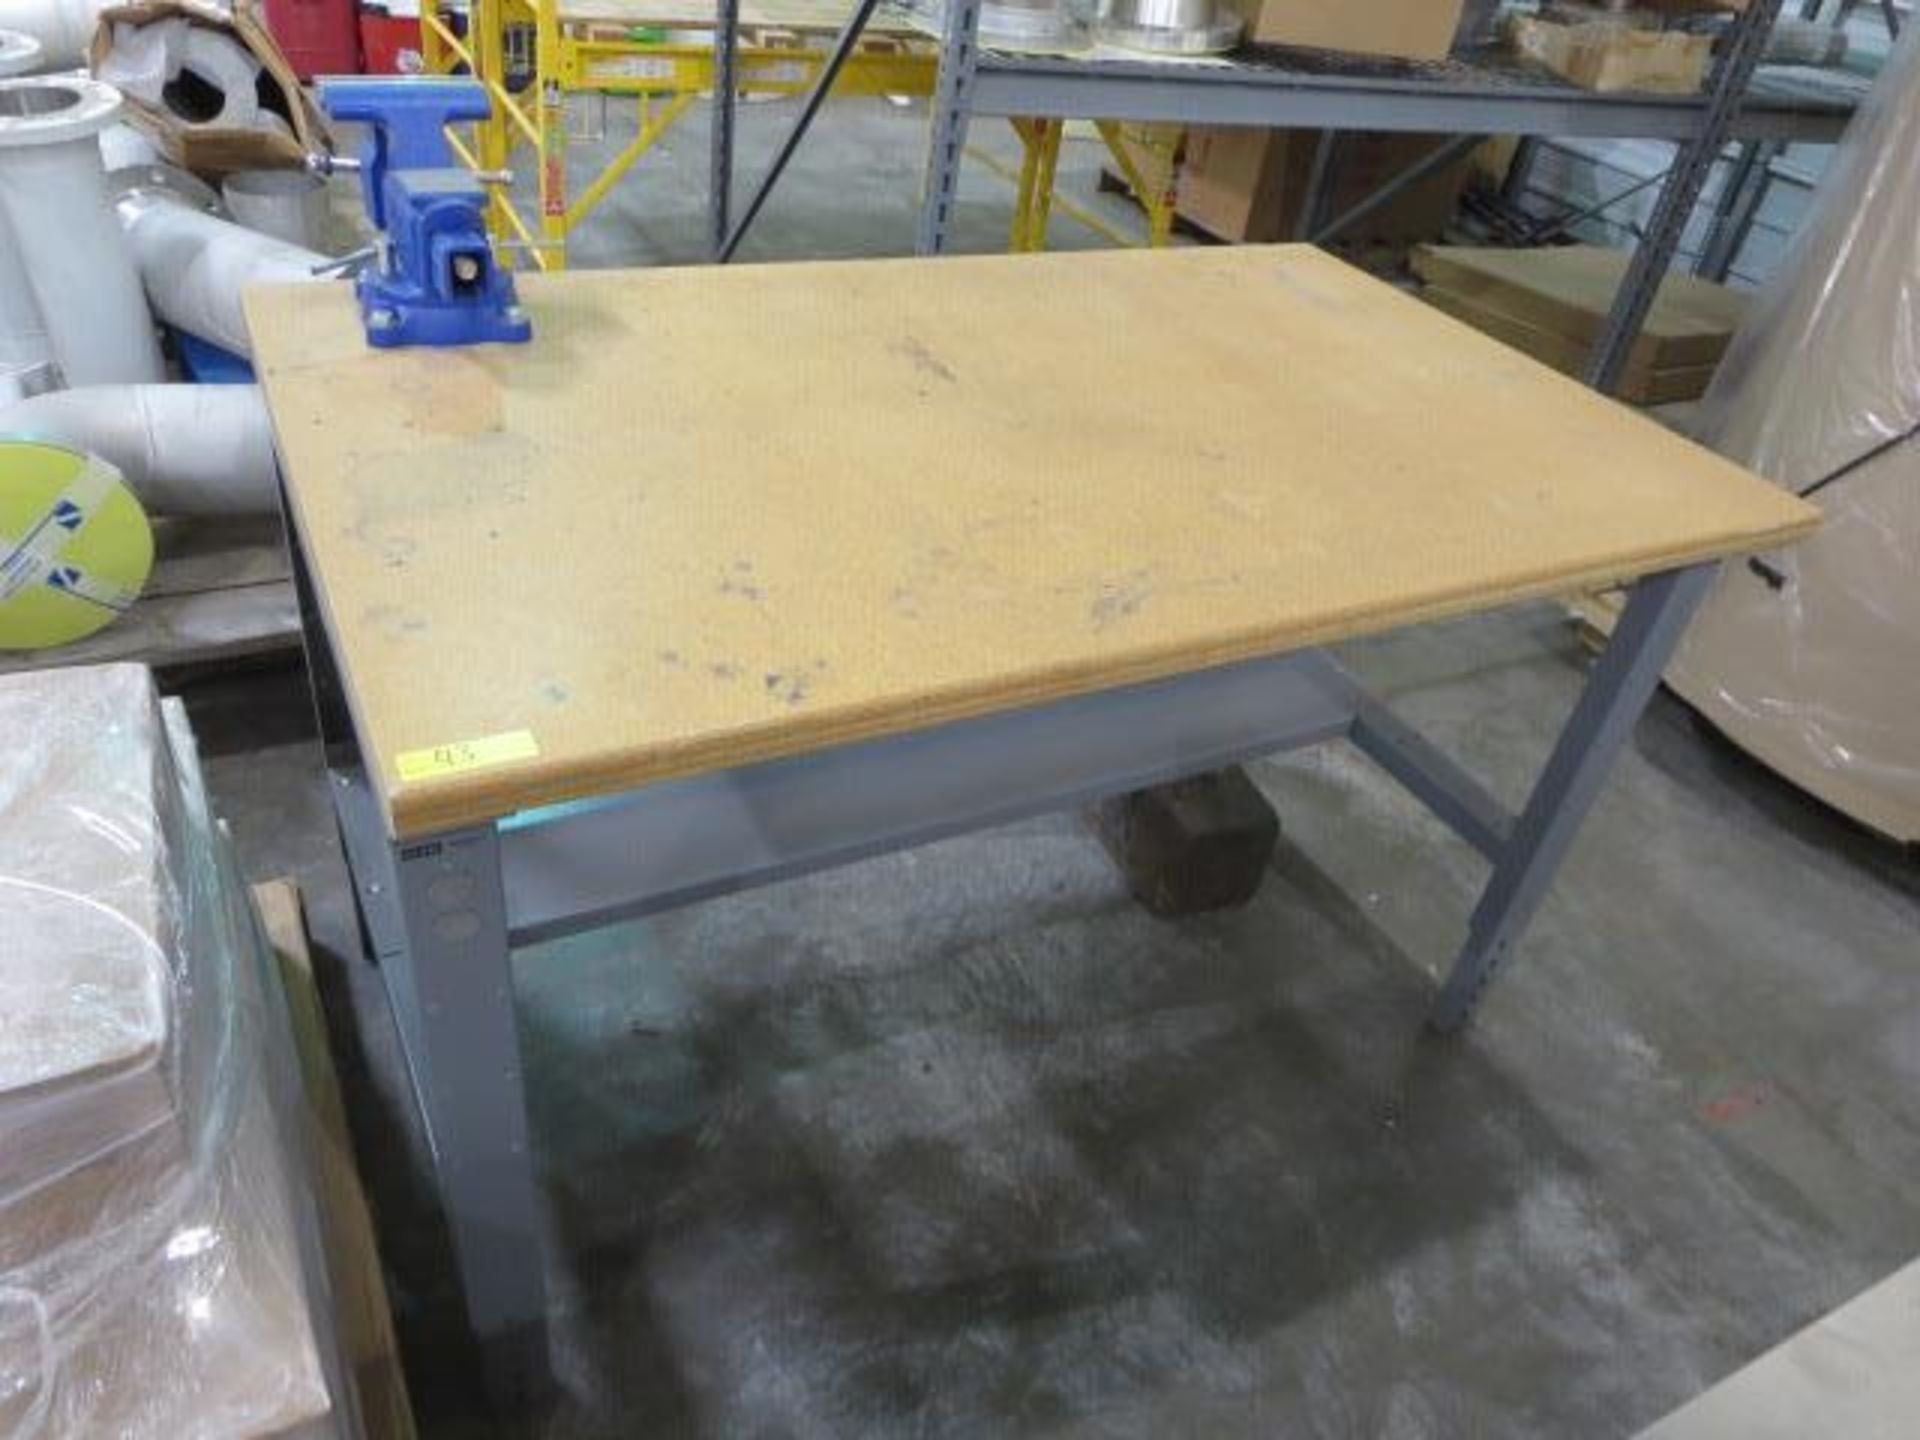 Shop Table w/ Vice Approx 4'